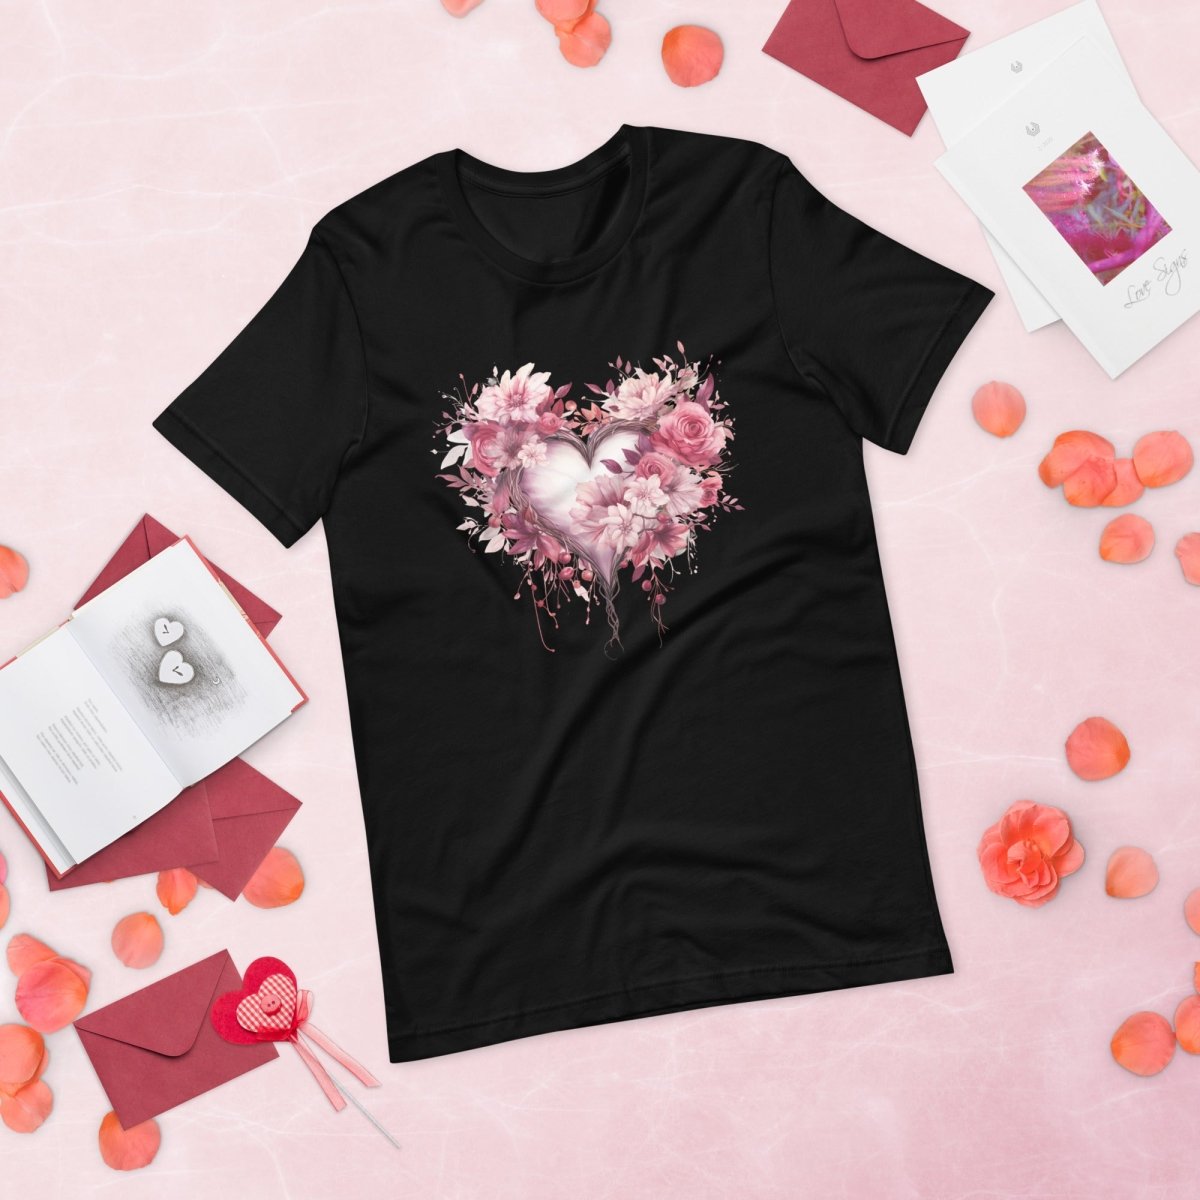 Flower Heart T-Shirt High Quality Floral Heart Valentines Day Shirt Love Gift for Her Love Tee Anniversary Shirt Cute Heart Tee Love Shirt - Everything Pixel